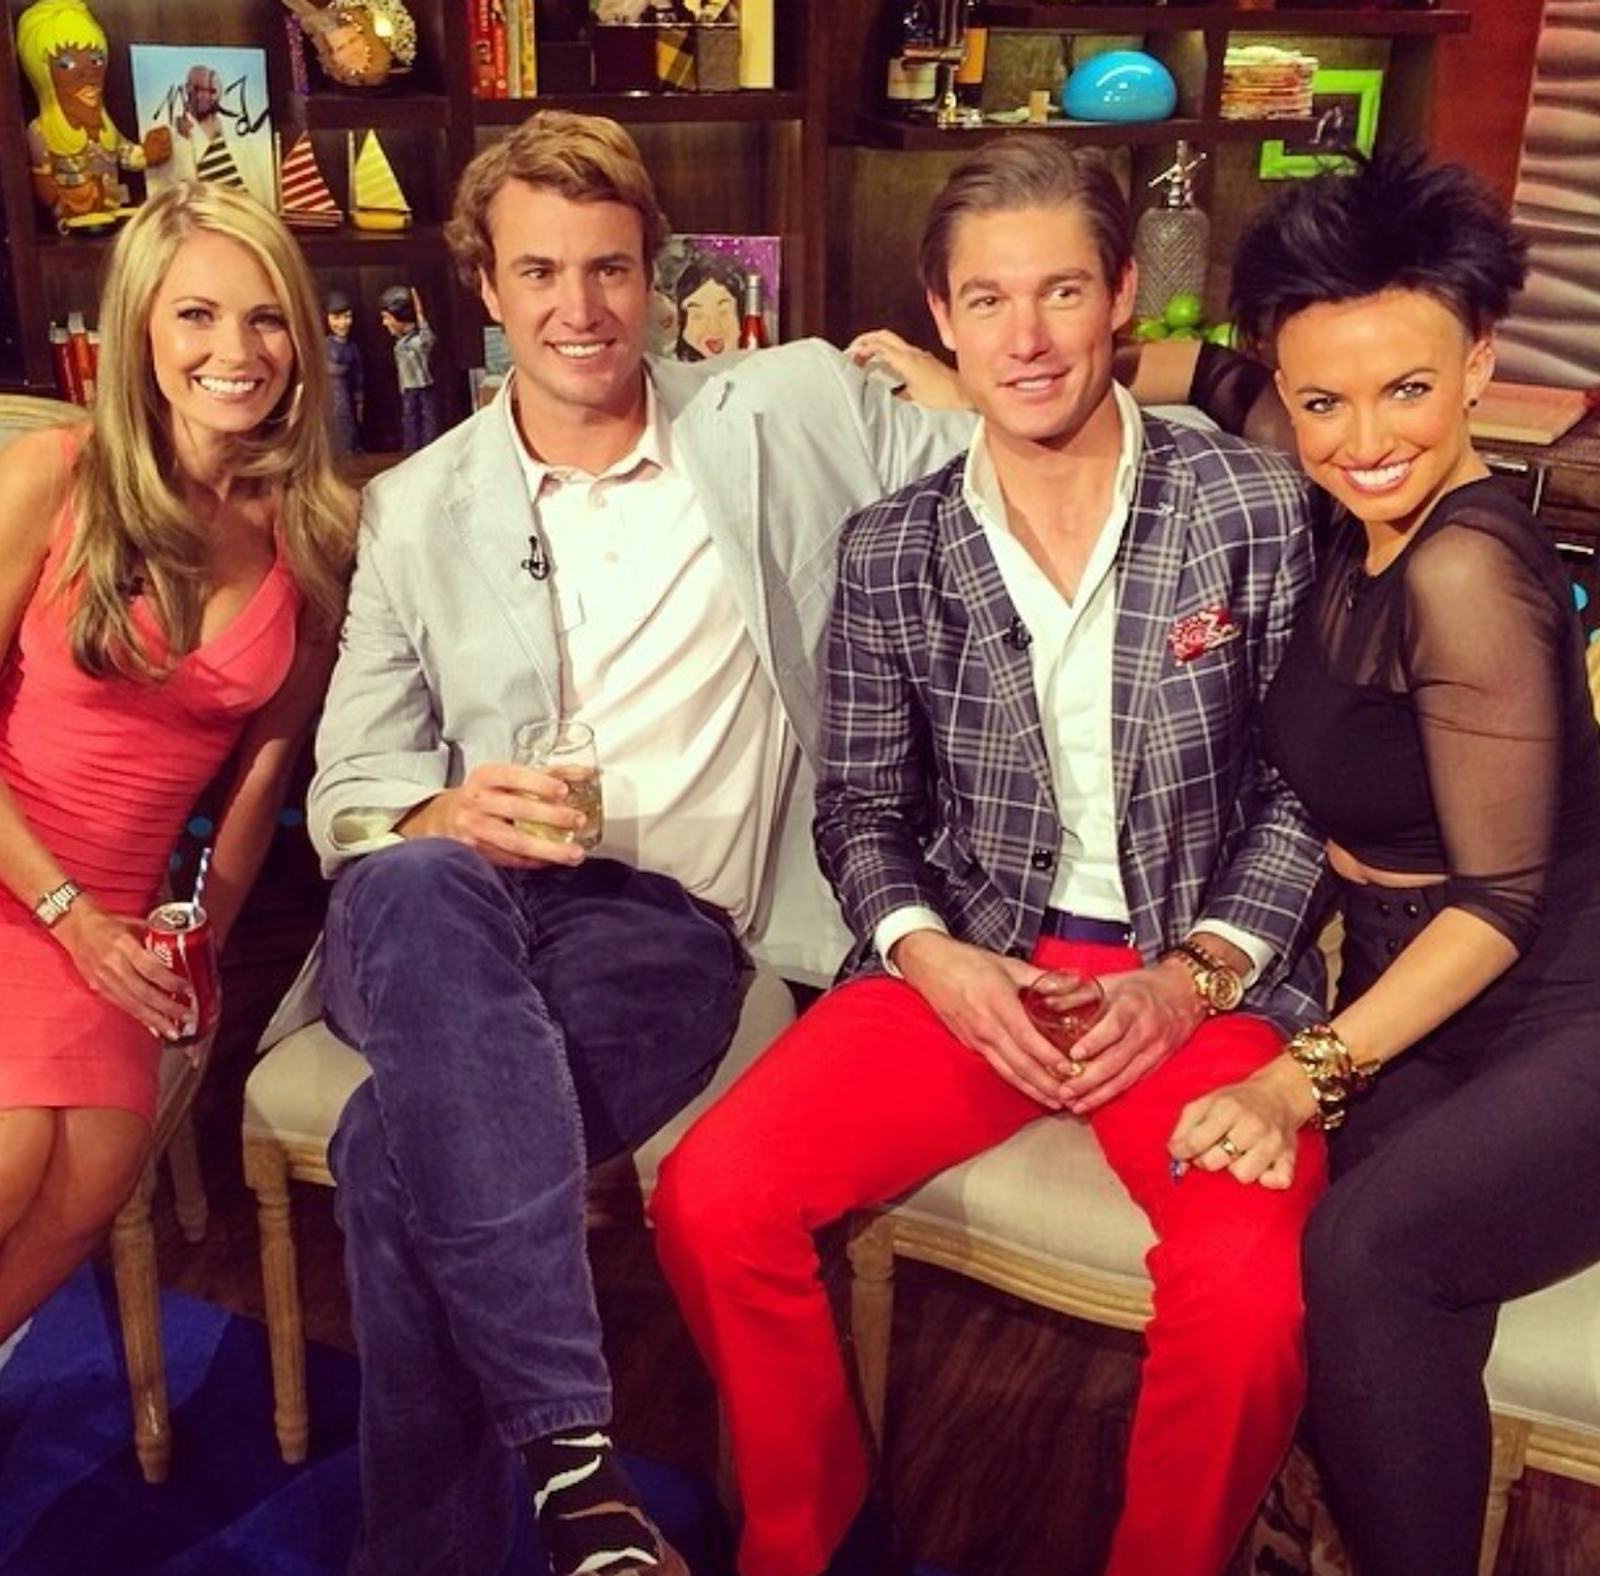 BehindtheScenes 'Southern Charm' Cast Reunion Photos Are Too Happy to